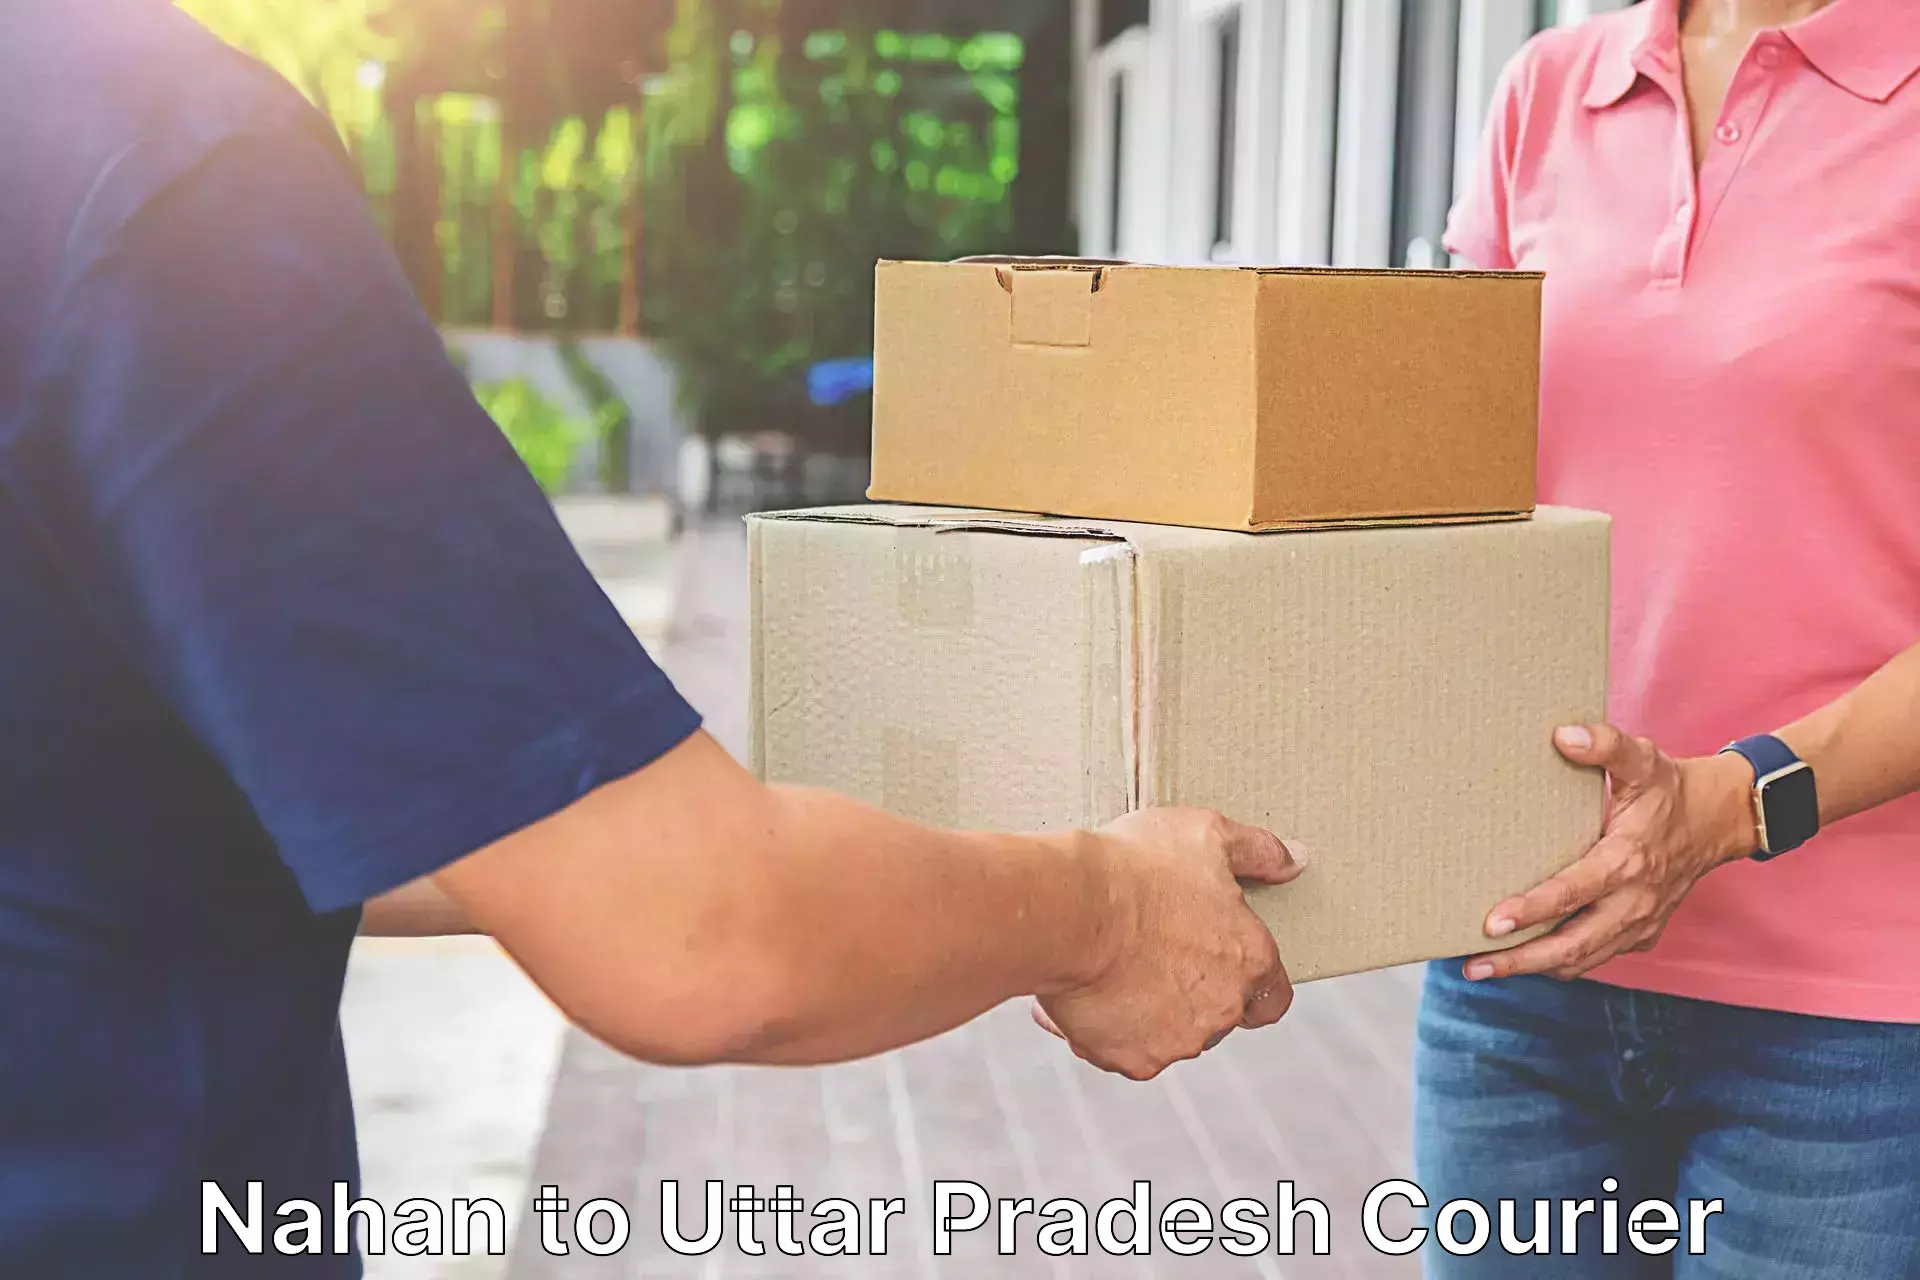 Courier app Nahan to Fatehabad Agra